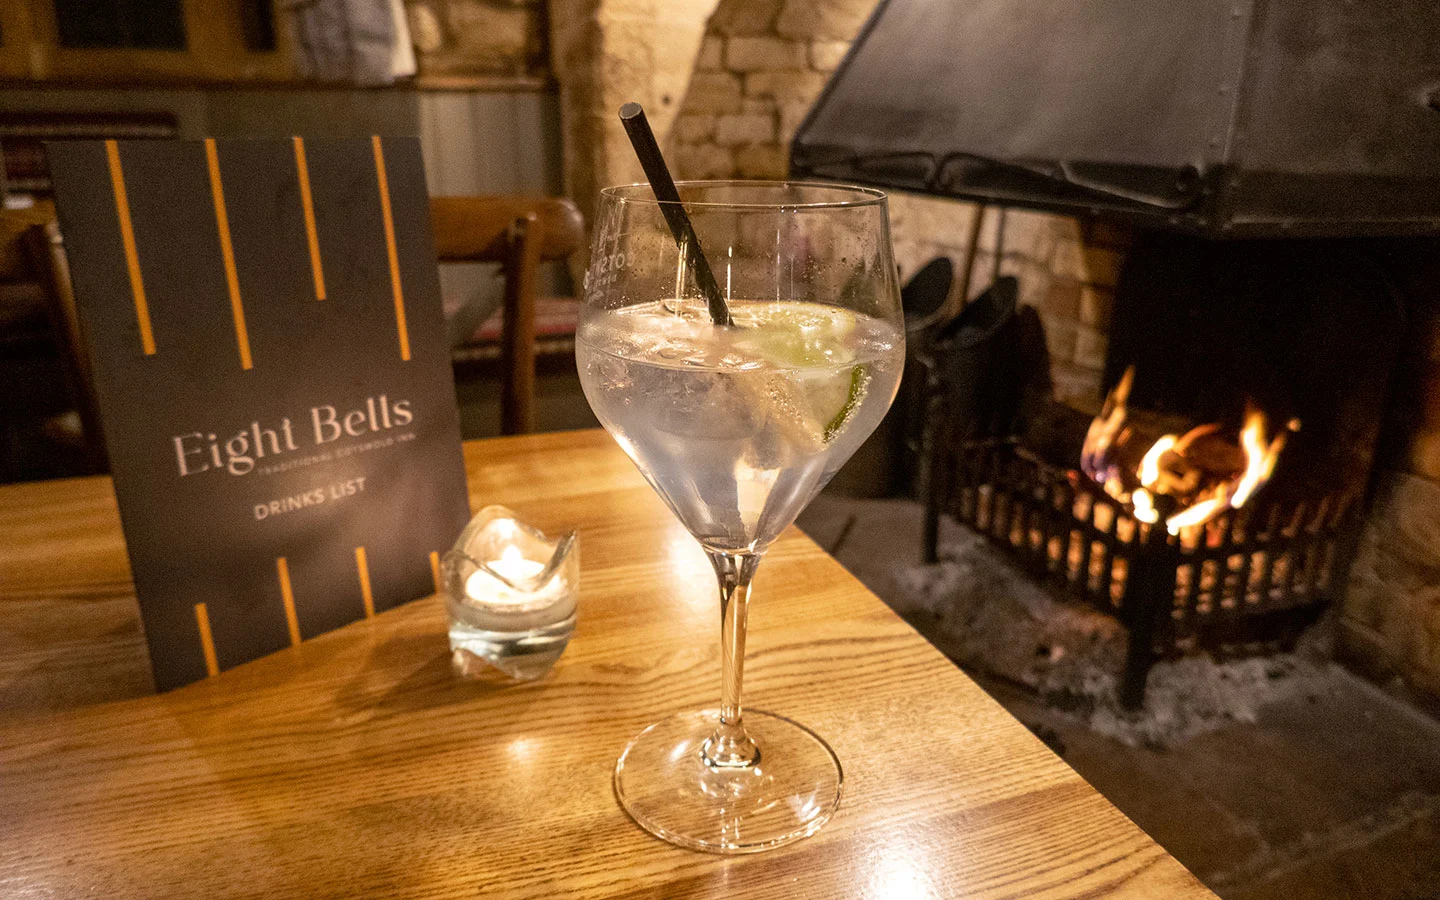 Drinks by the fire at the Eight Bells pub in Chipping Campden